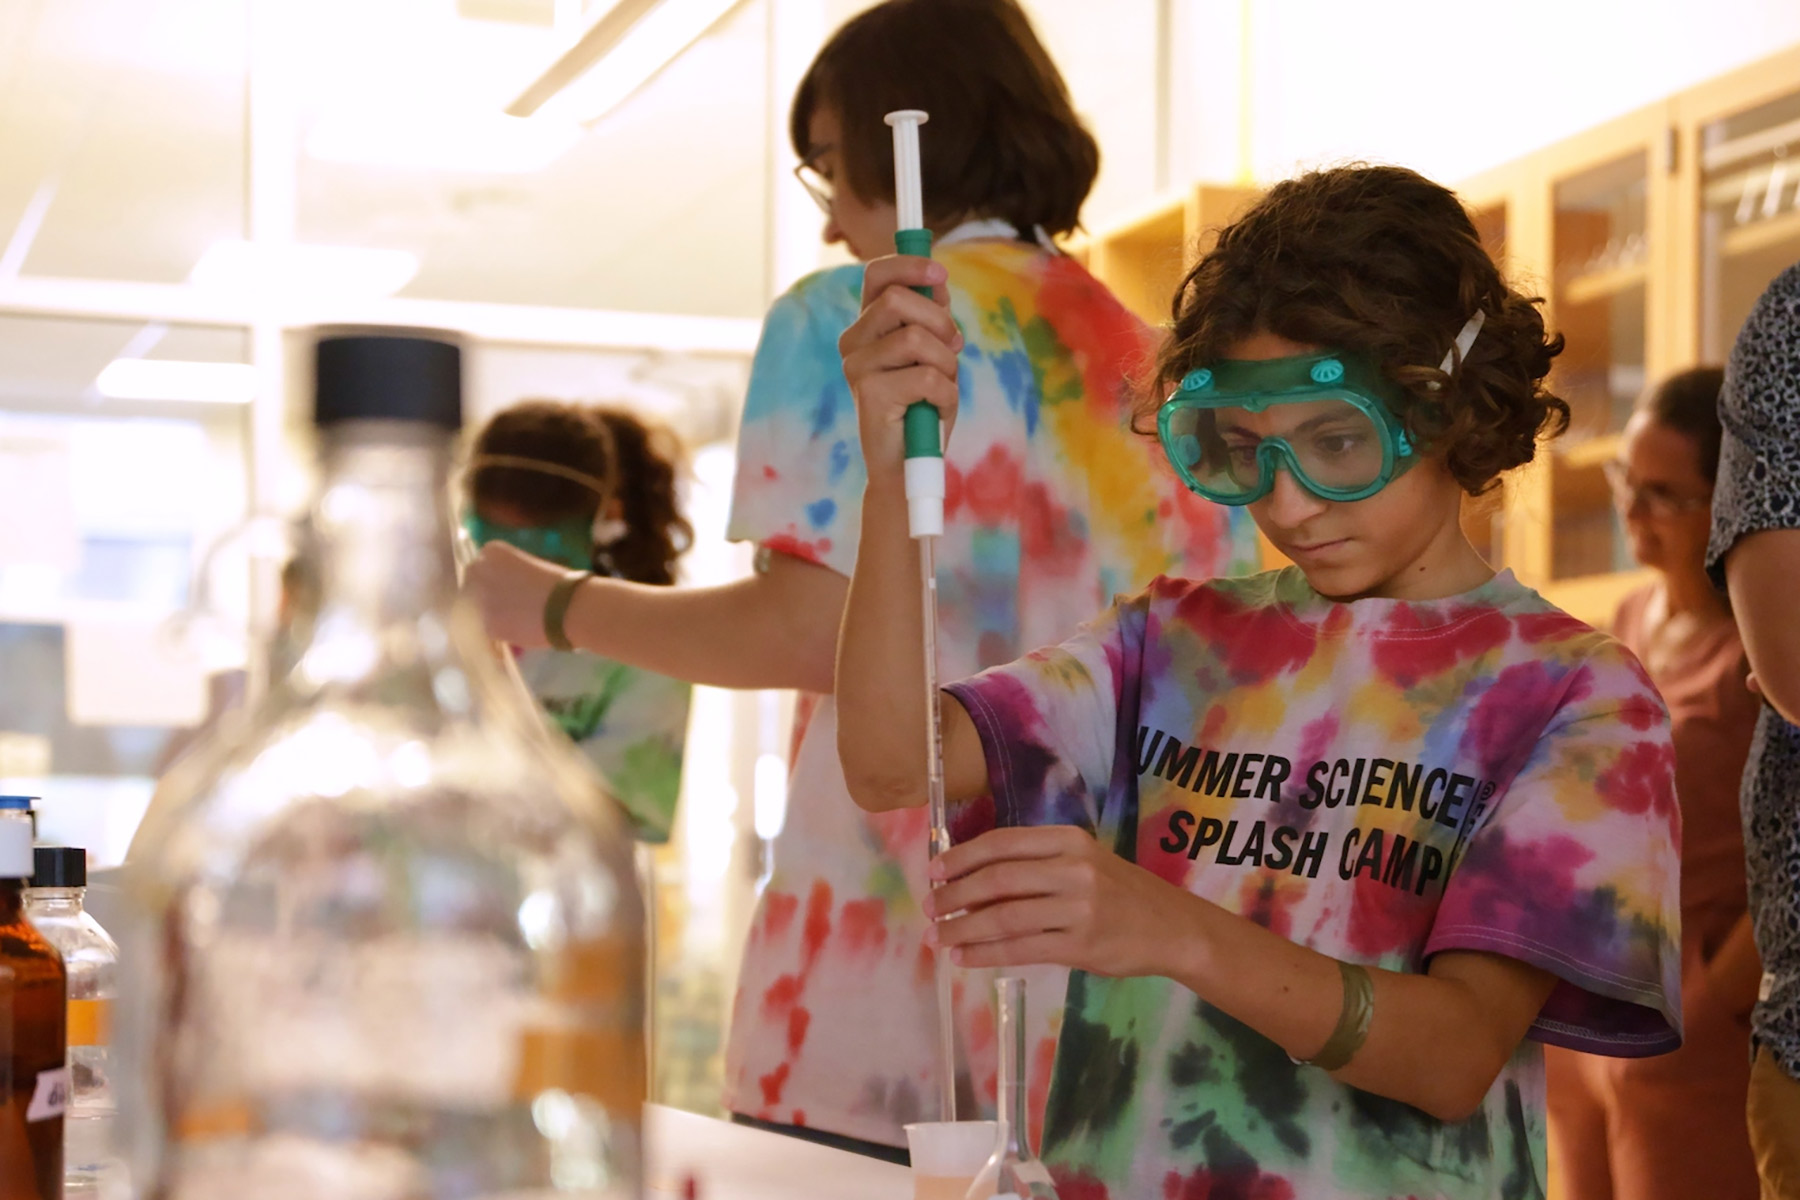 Eckerd College Summer Science Splash Camp receives $22,000 grant to support underprivileged students in STEM education and recreational activities